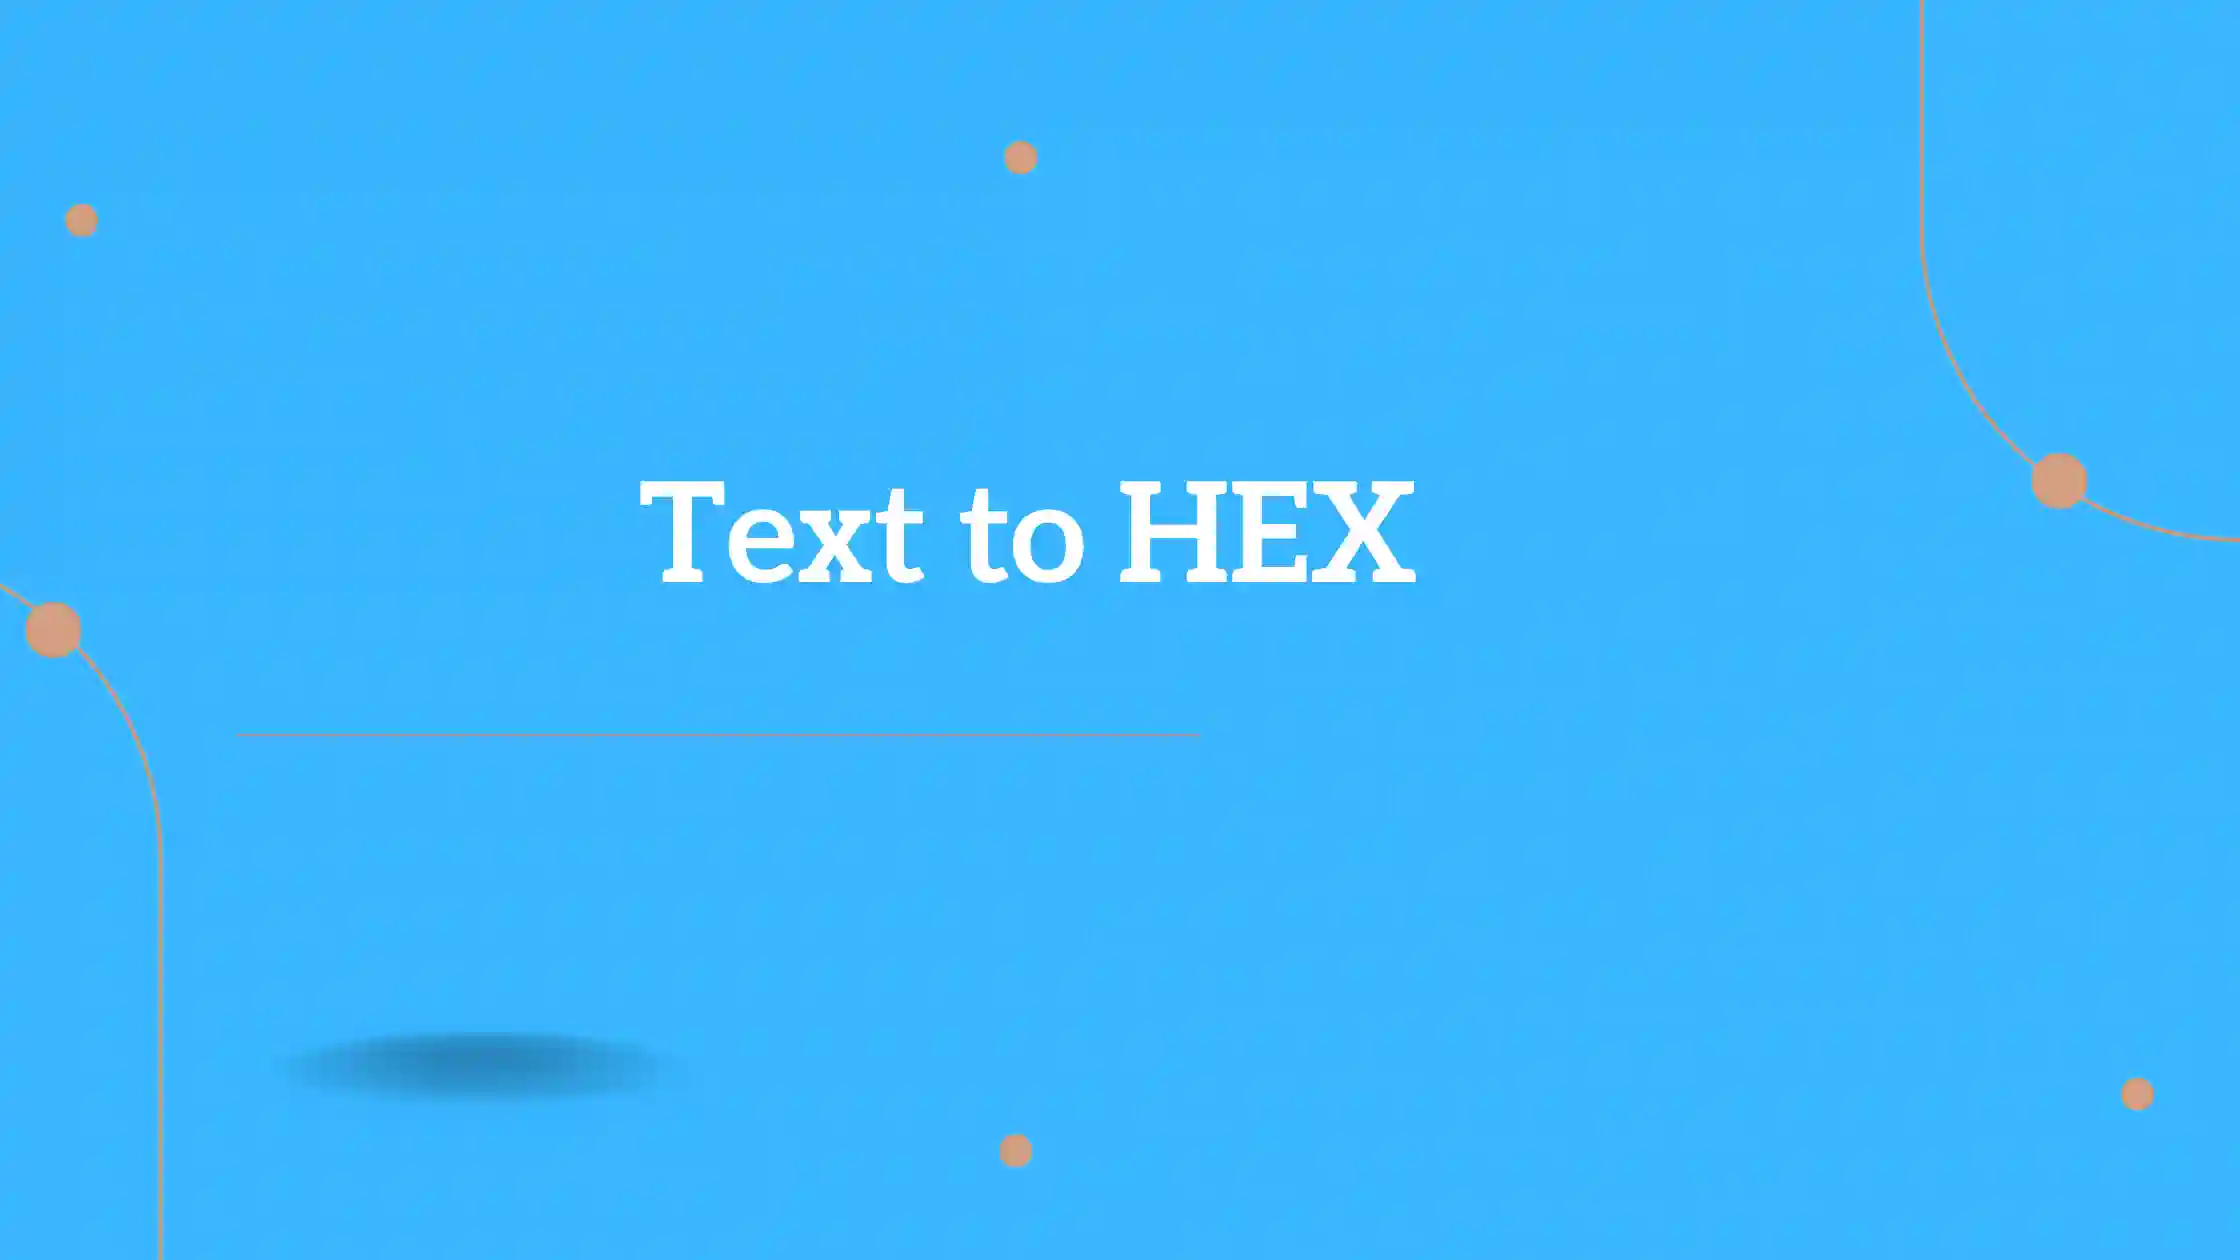 Text to HEX CONVERTER